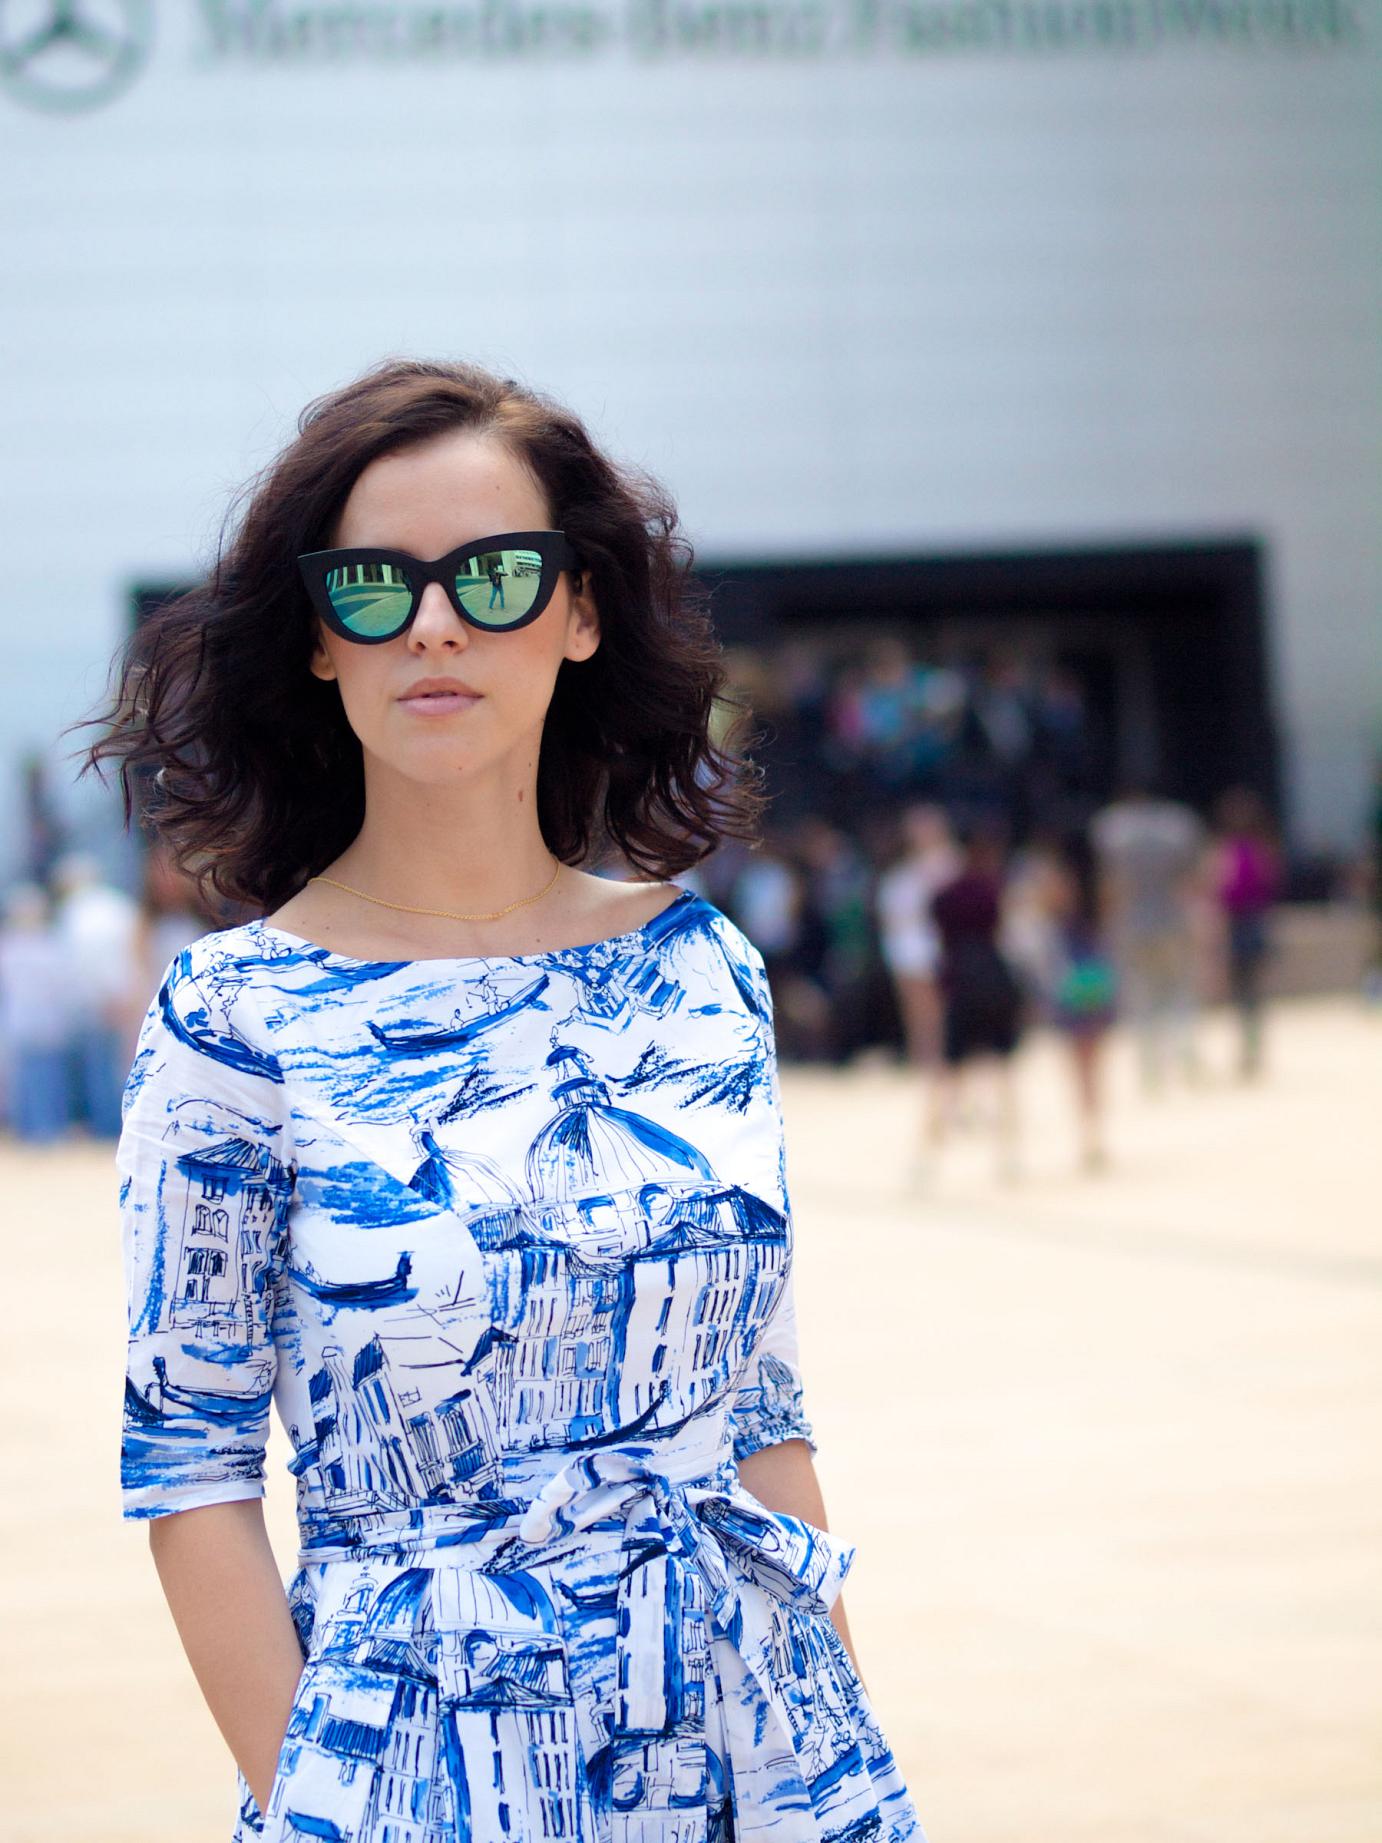 asos sunglasses, bittersweet colours, cooee jewelry, eye cat sunglasses, facine bag, green shoes, ink drawing print dress, lincoln Center nyfw, mirrored sunglasses, New York, nyfw september 2014, nyfw street style, pierre hardy shoes, printed dress, 